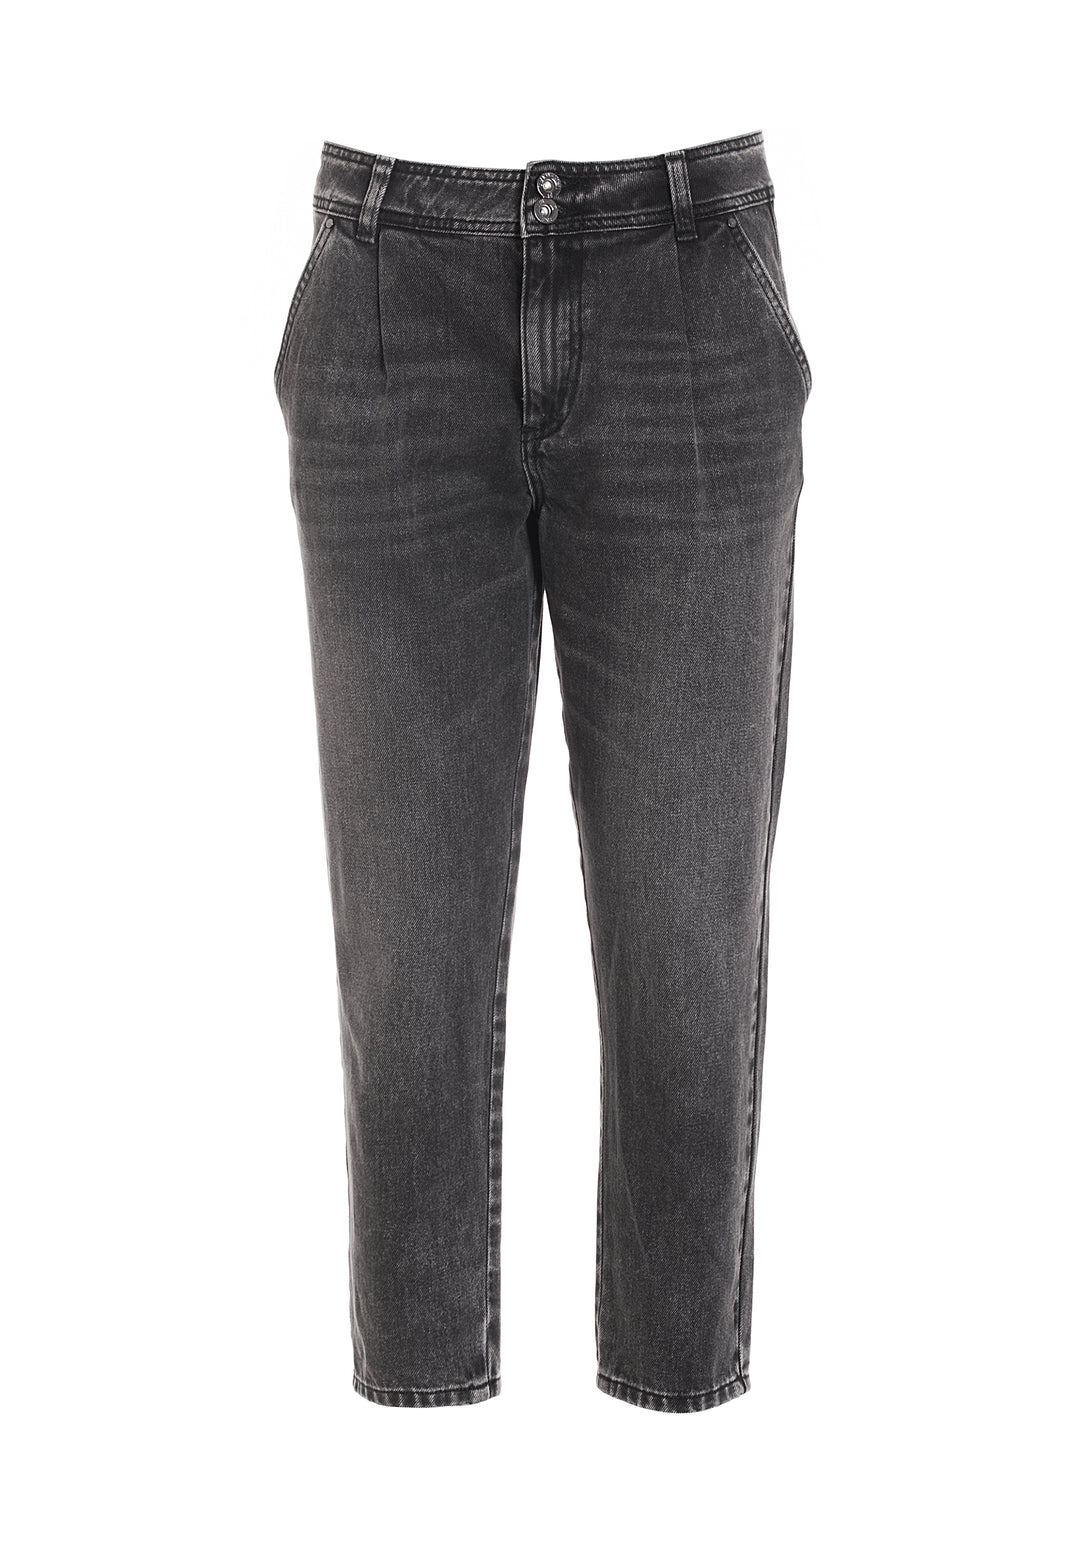 Chinos jeans regular fit made in black denim with middle wash